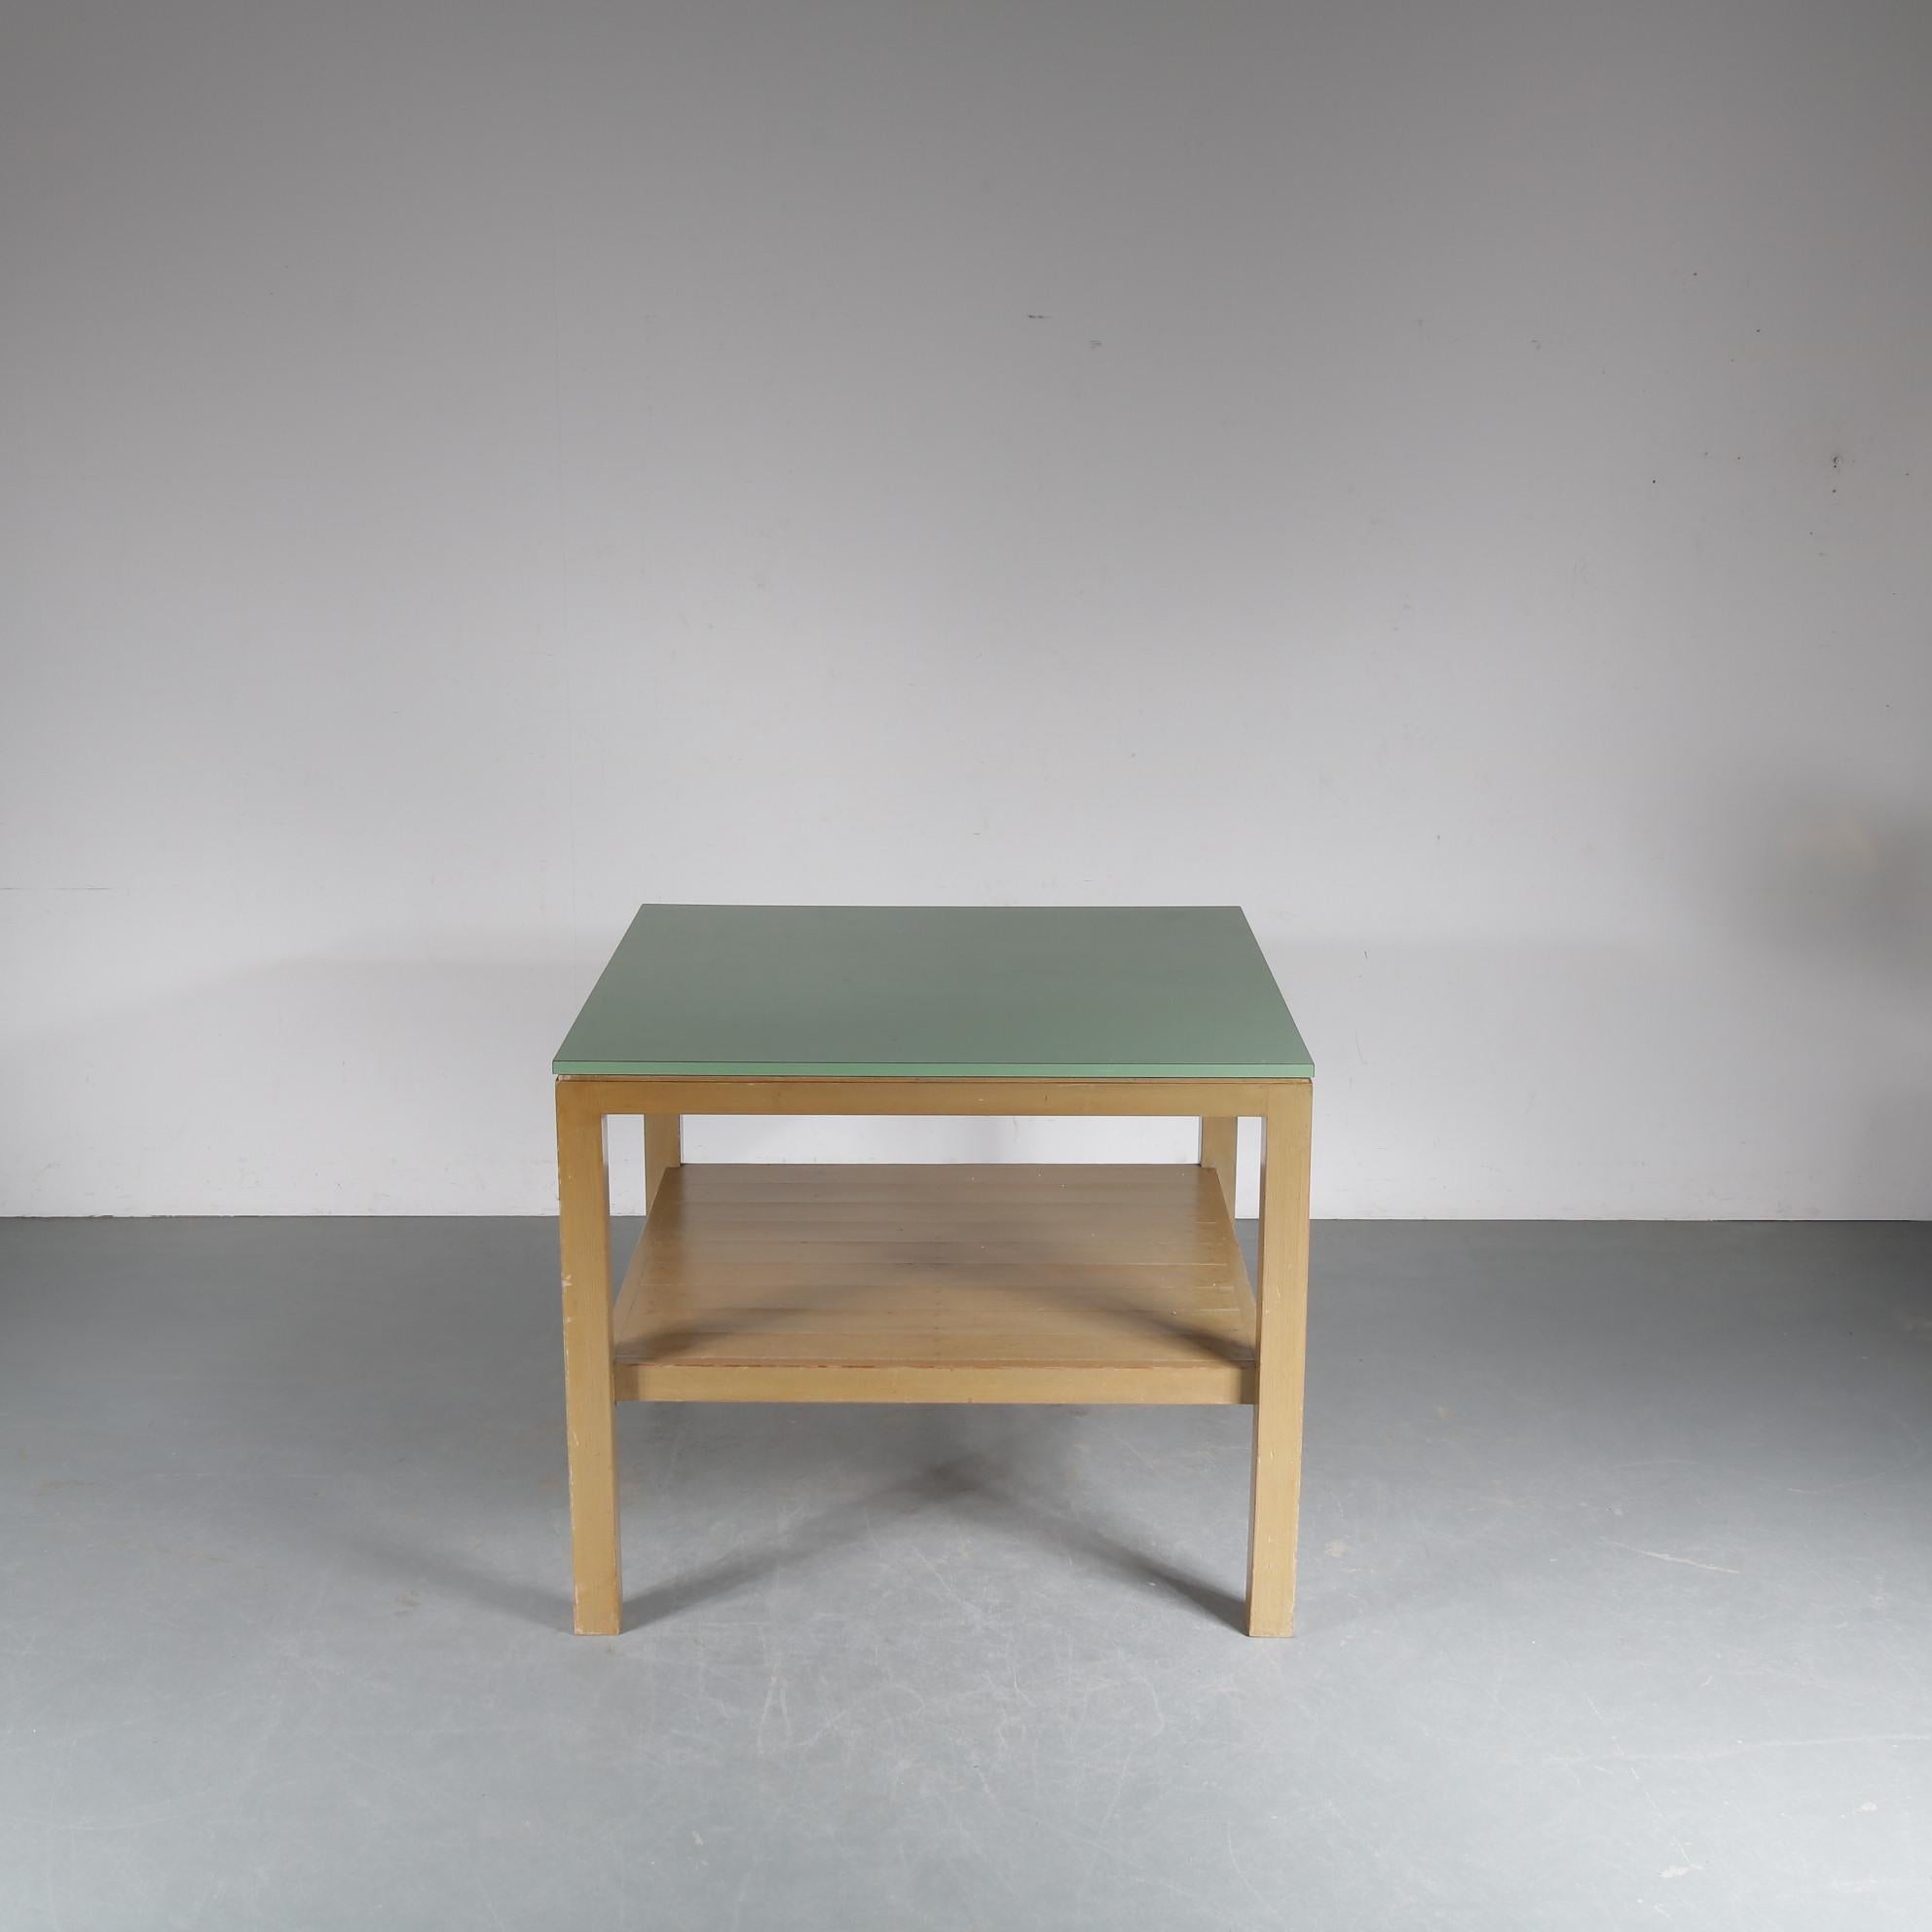 Rare Dom Hans van der Laan Working Table, Netherlands, 1970 In Good Condition For Sale In Amsterdam, NL